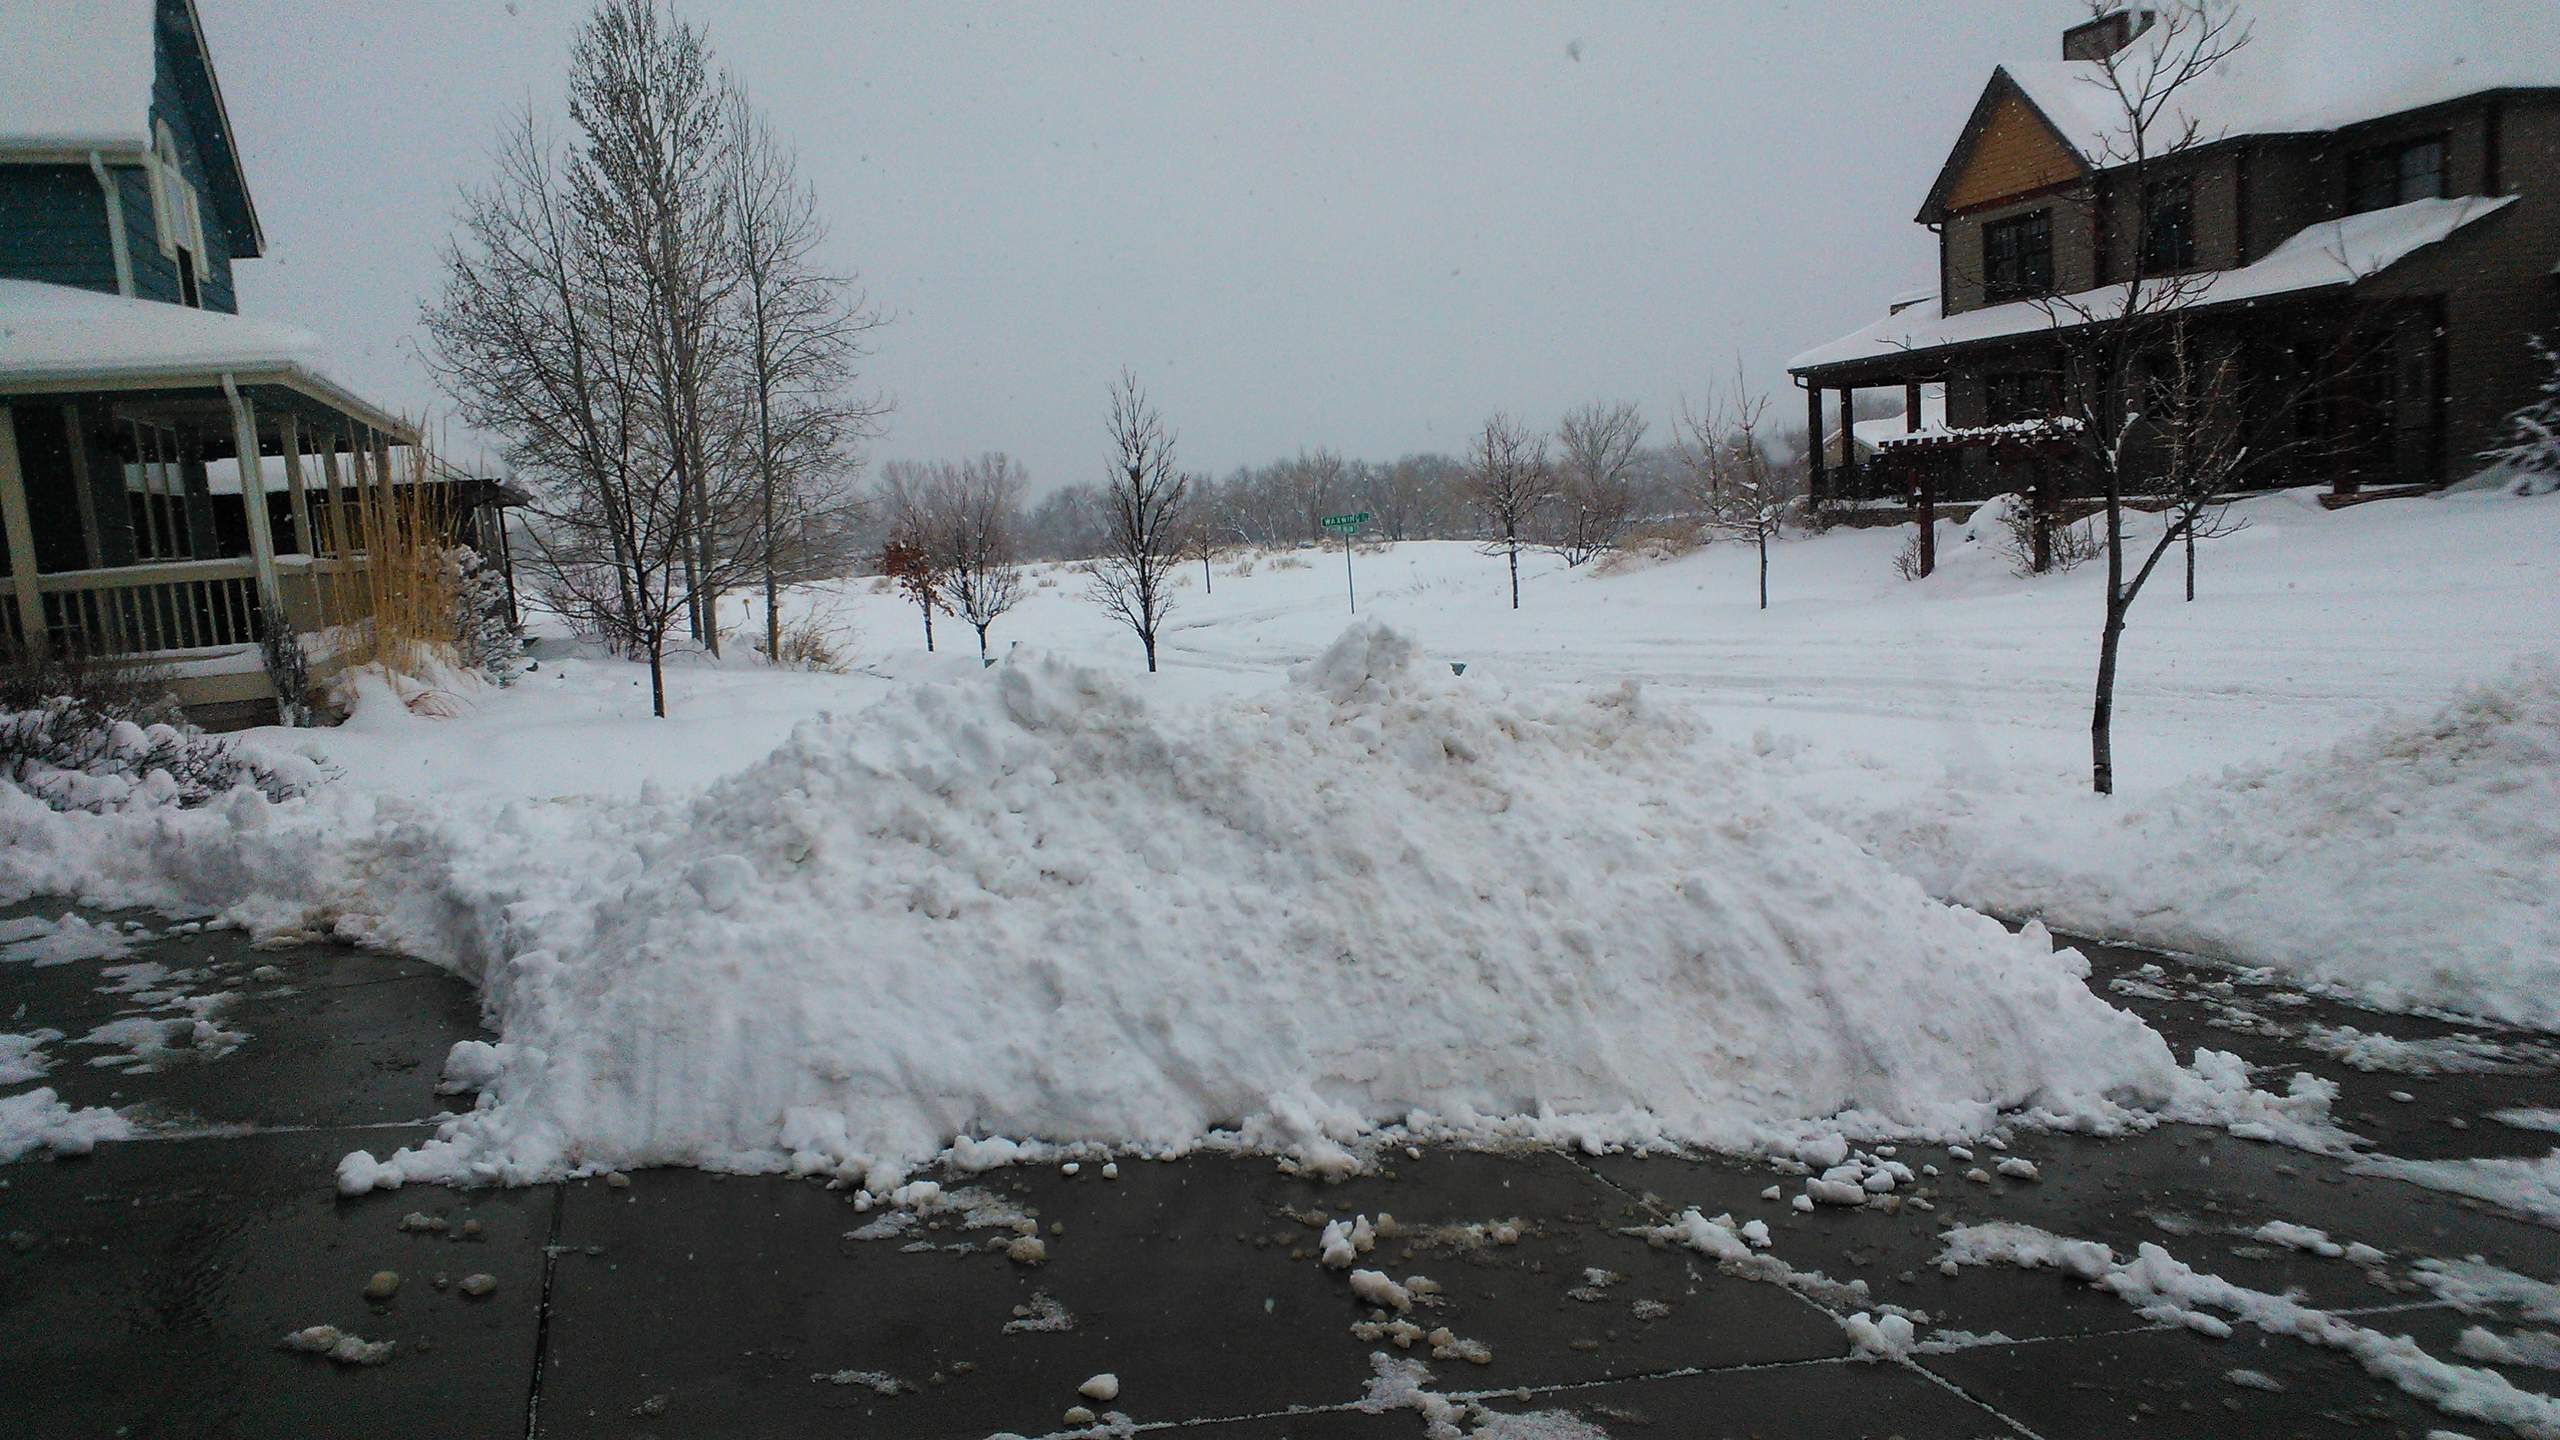 Day 3: "There's almost no more room to put all this snow!" exclaimed my neighbor.